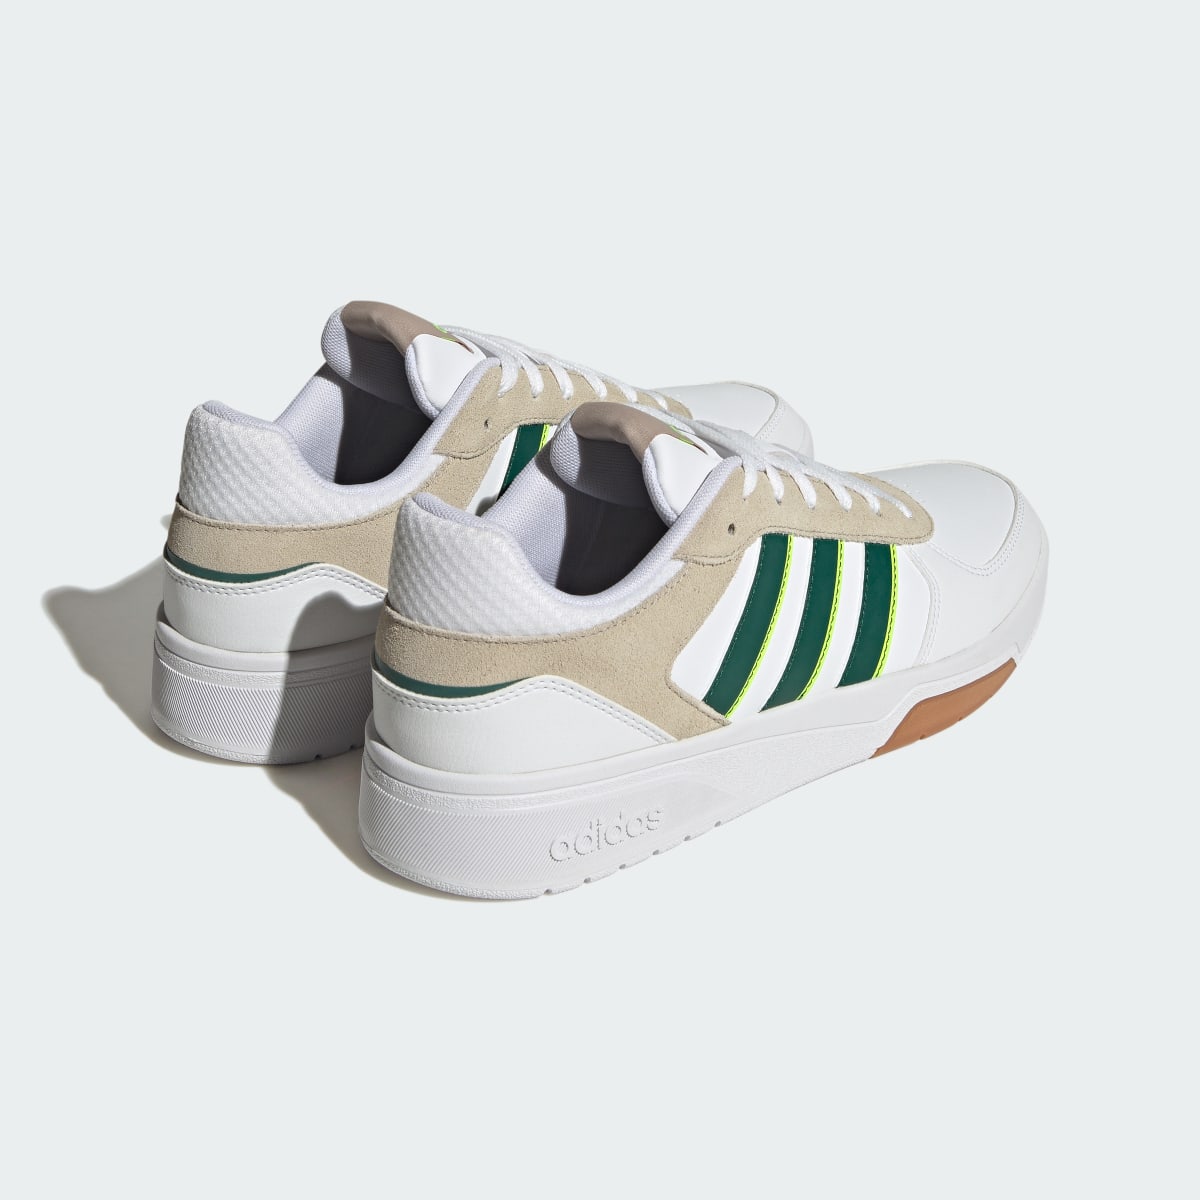 Adidas Courtbeat Shoes. 6